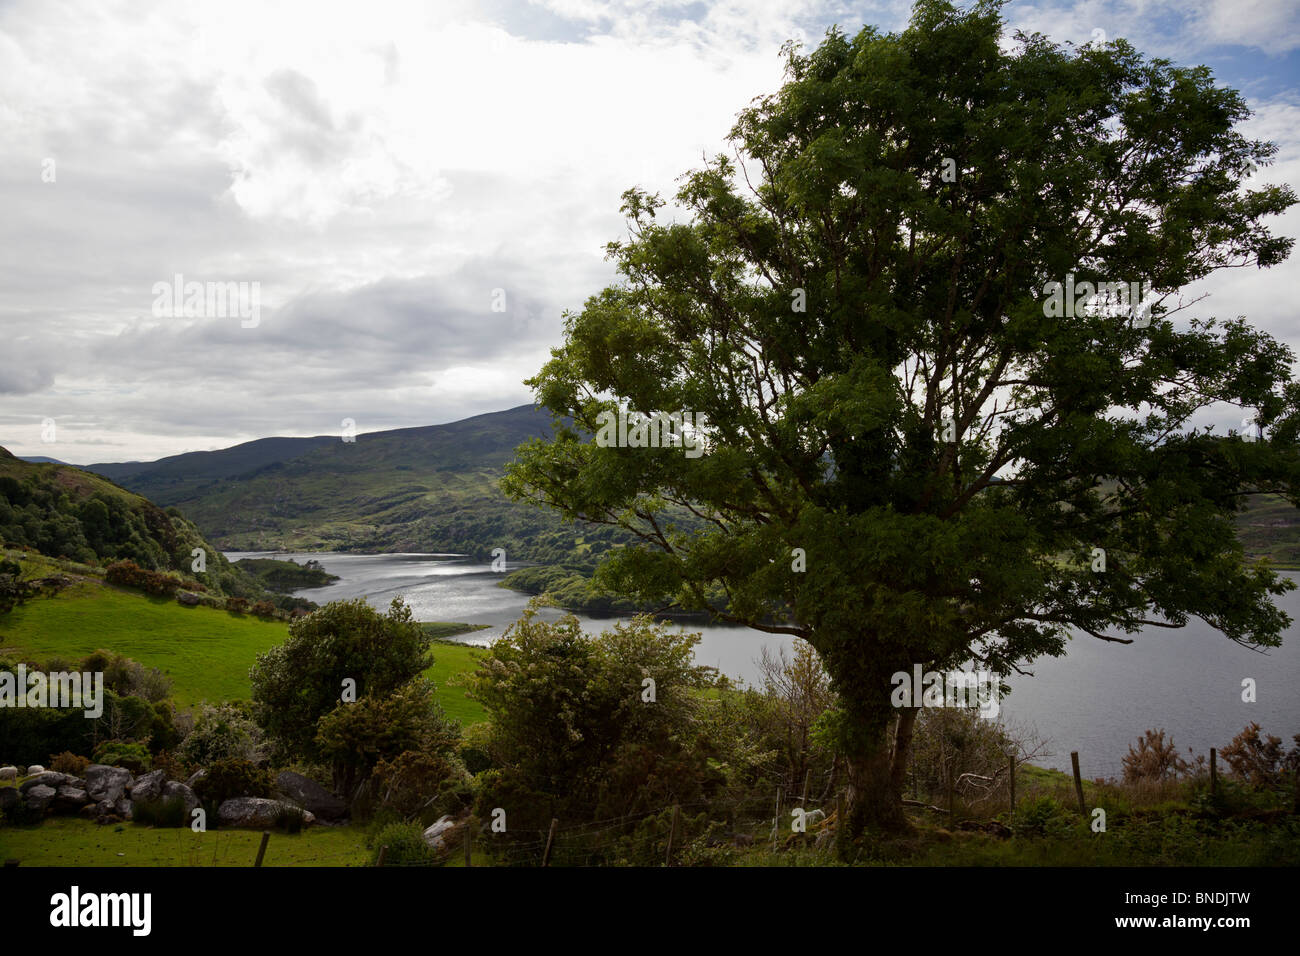 Abend am Lough Caragh, Co. Kerry, Irland Stockfoto